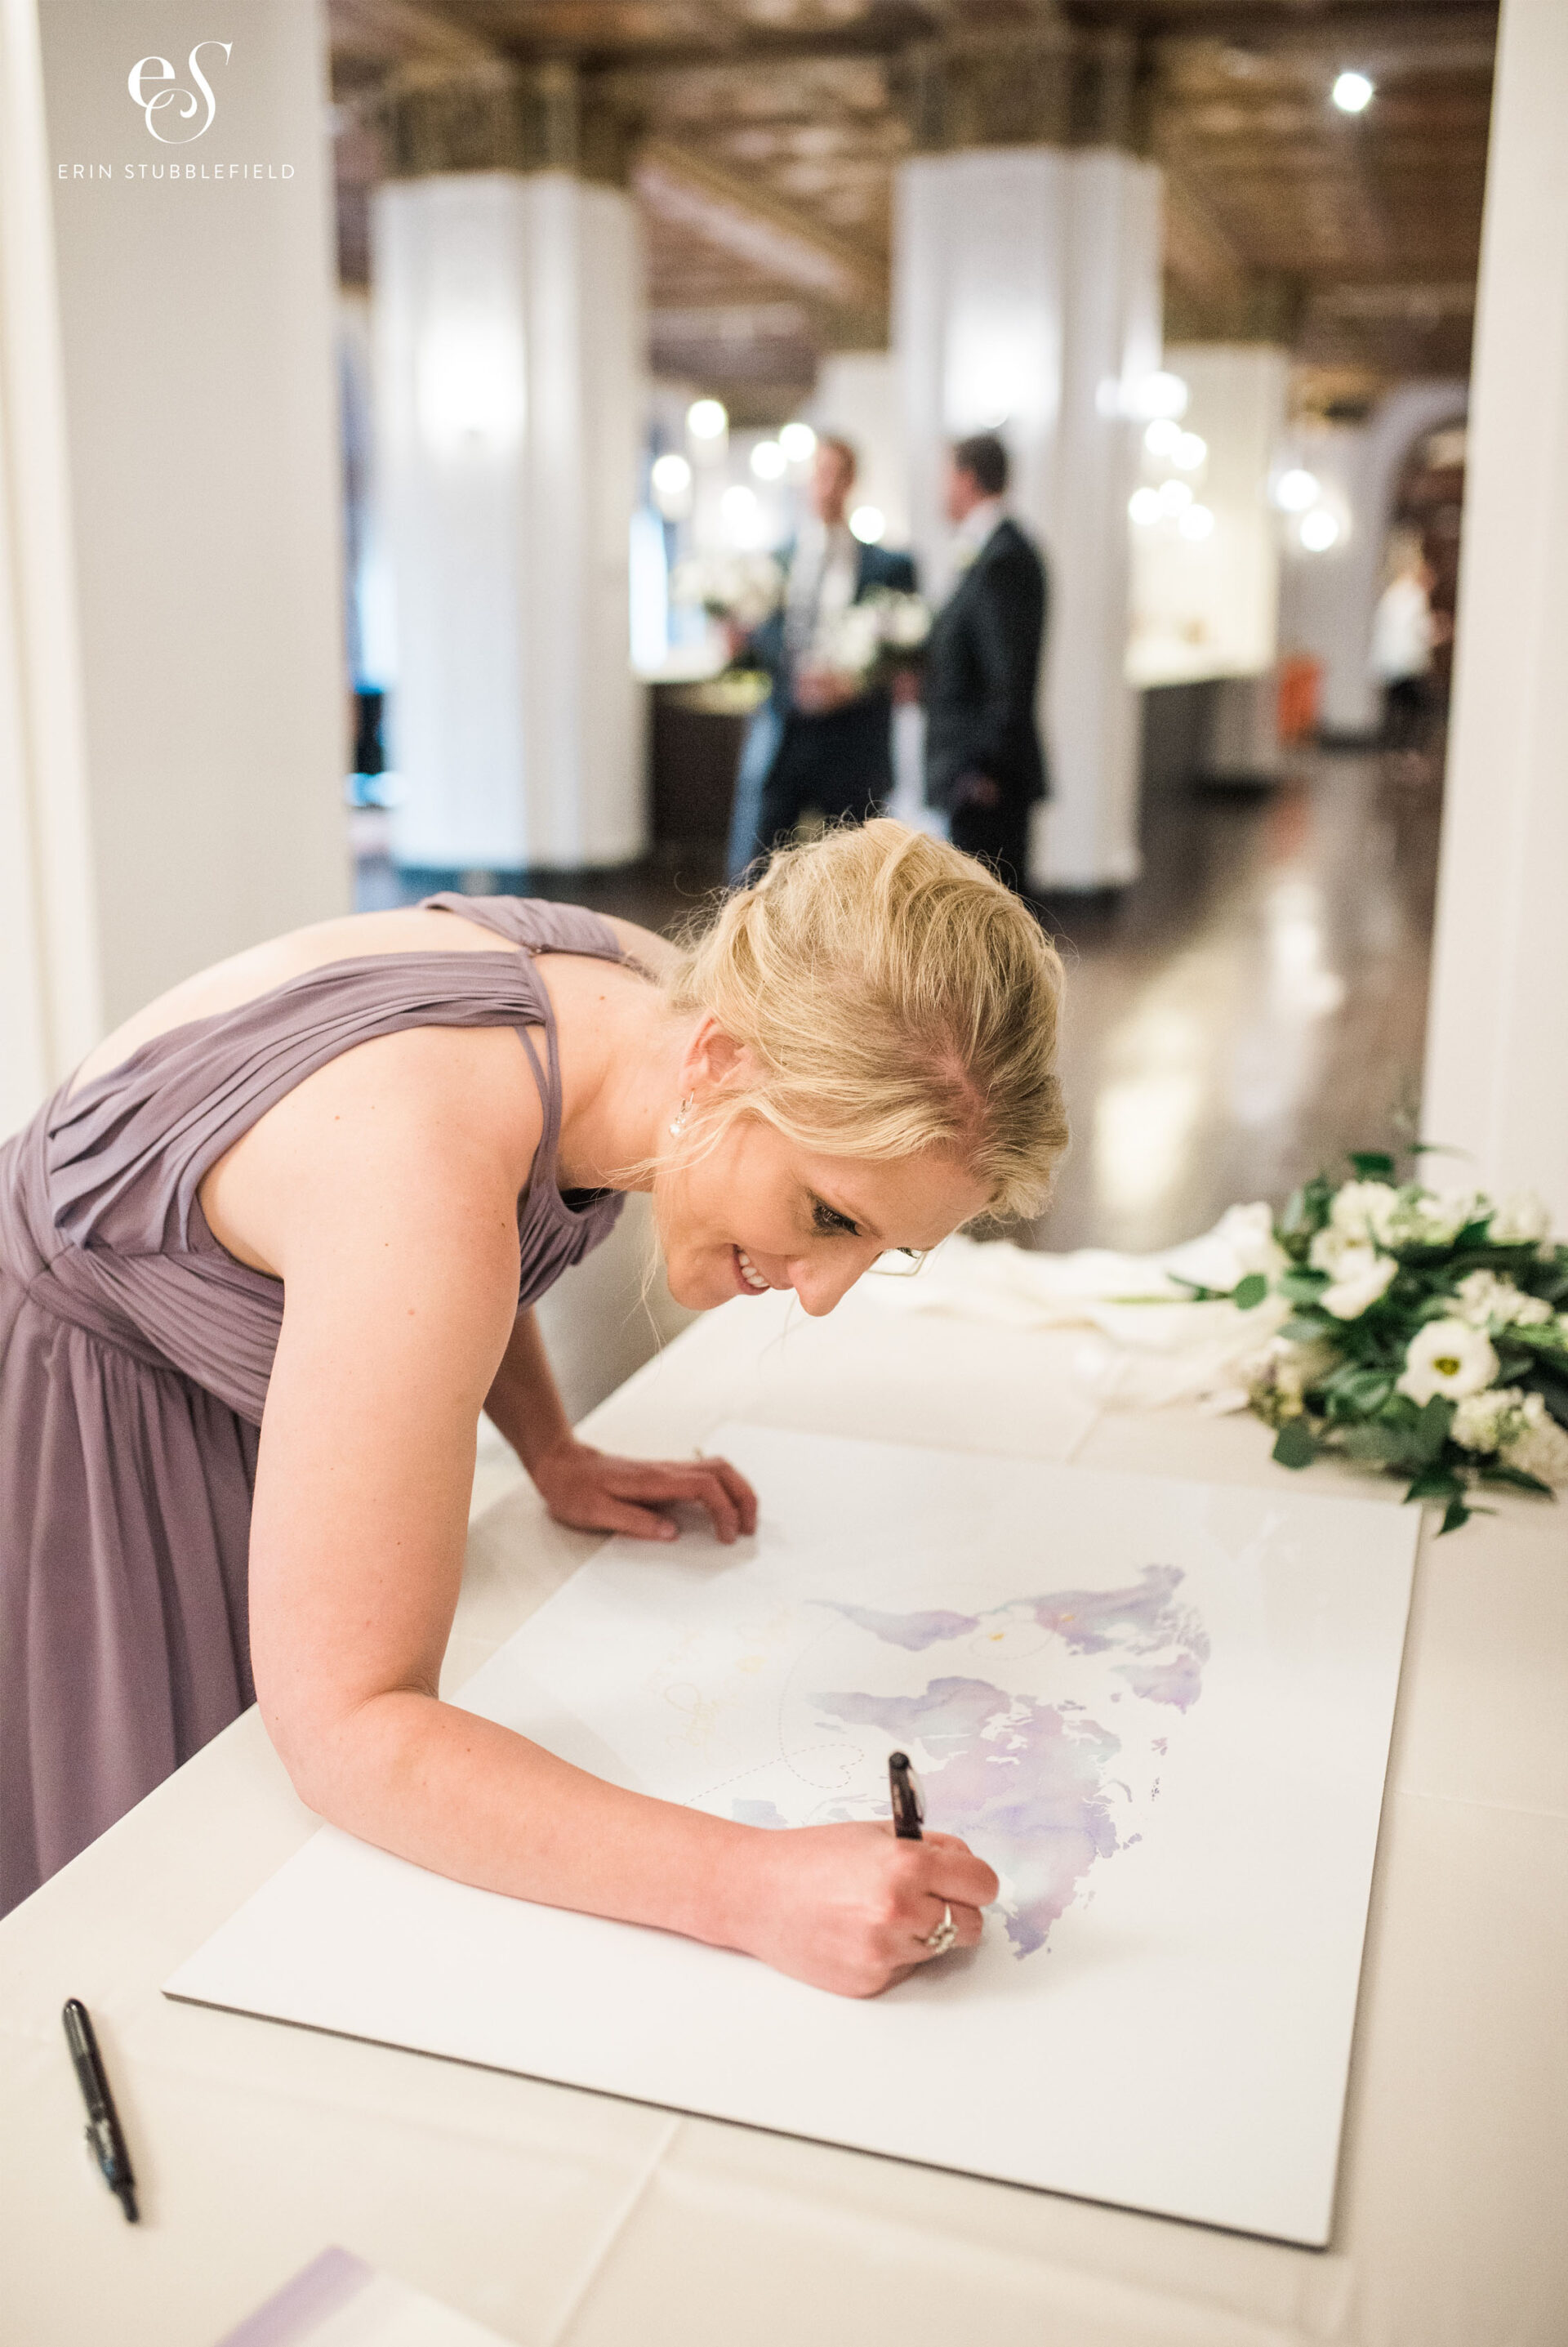 Bridesmaid in a light pink dress signing over her home city in wedding guest book, which is actually a map